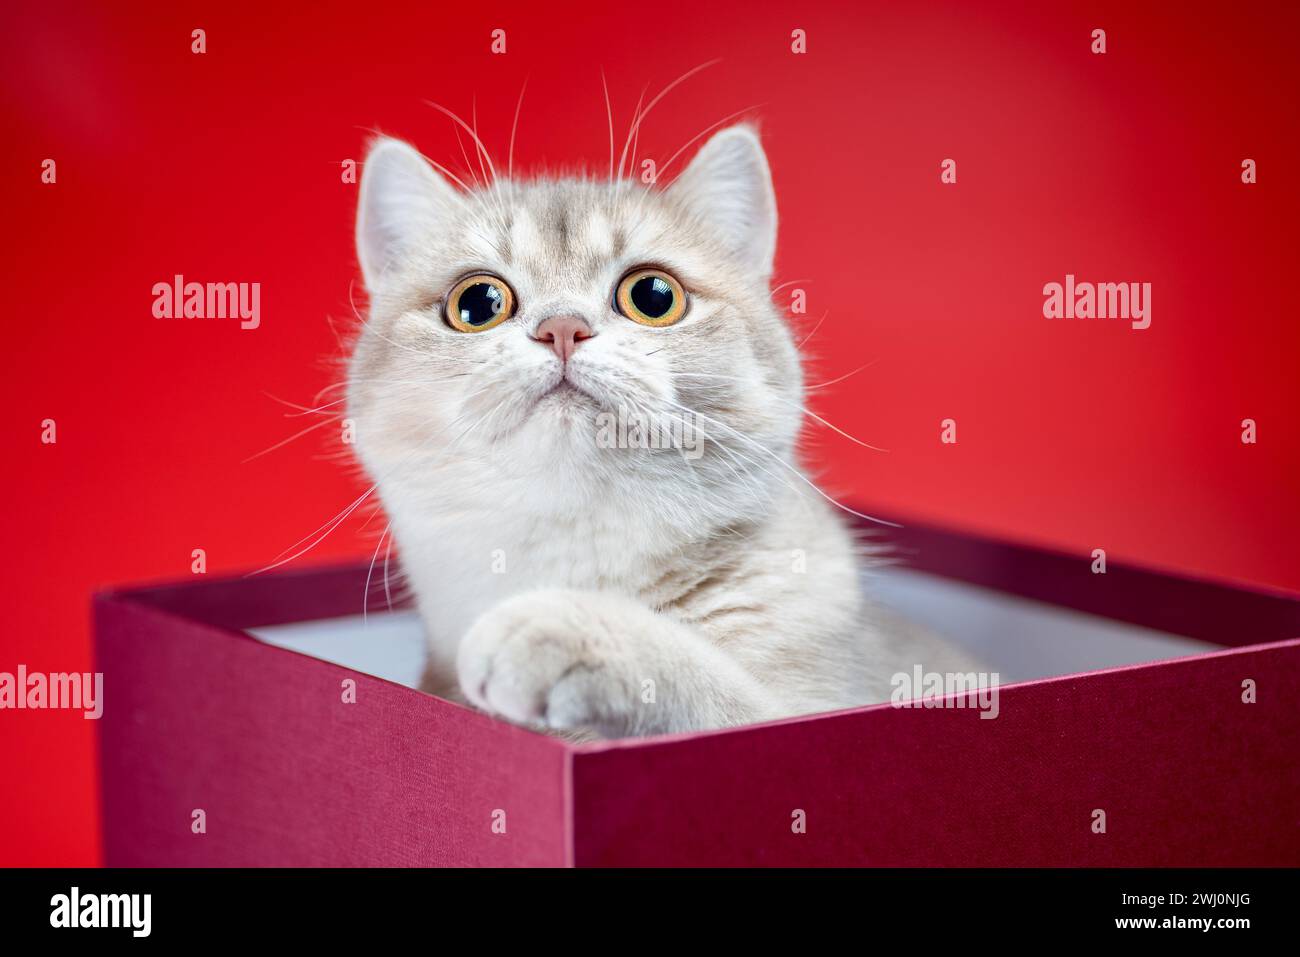 British shorthair cat sits in a burgundy box on a red background Stock Photo